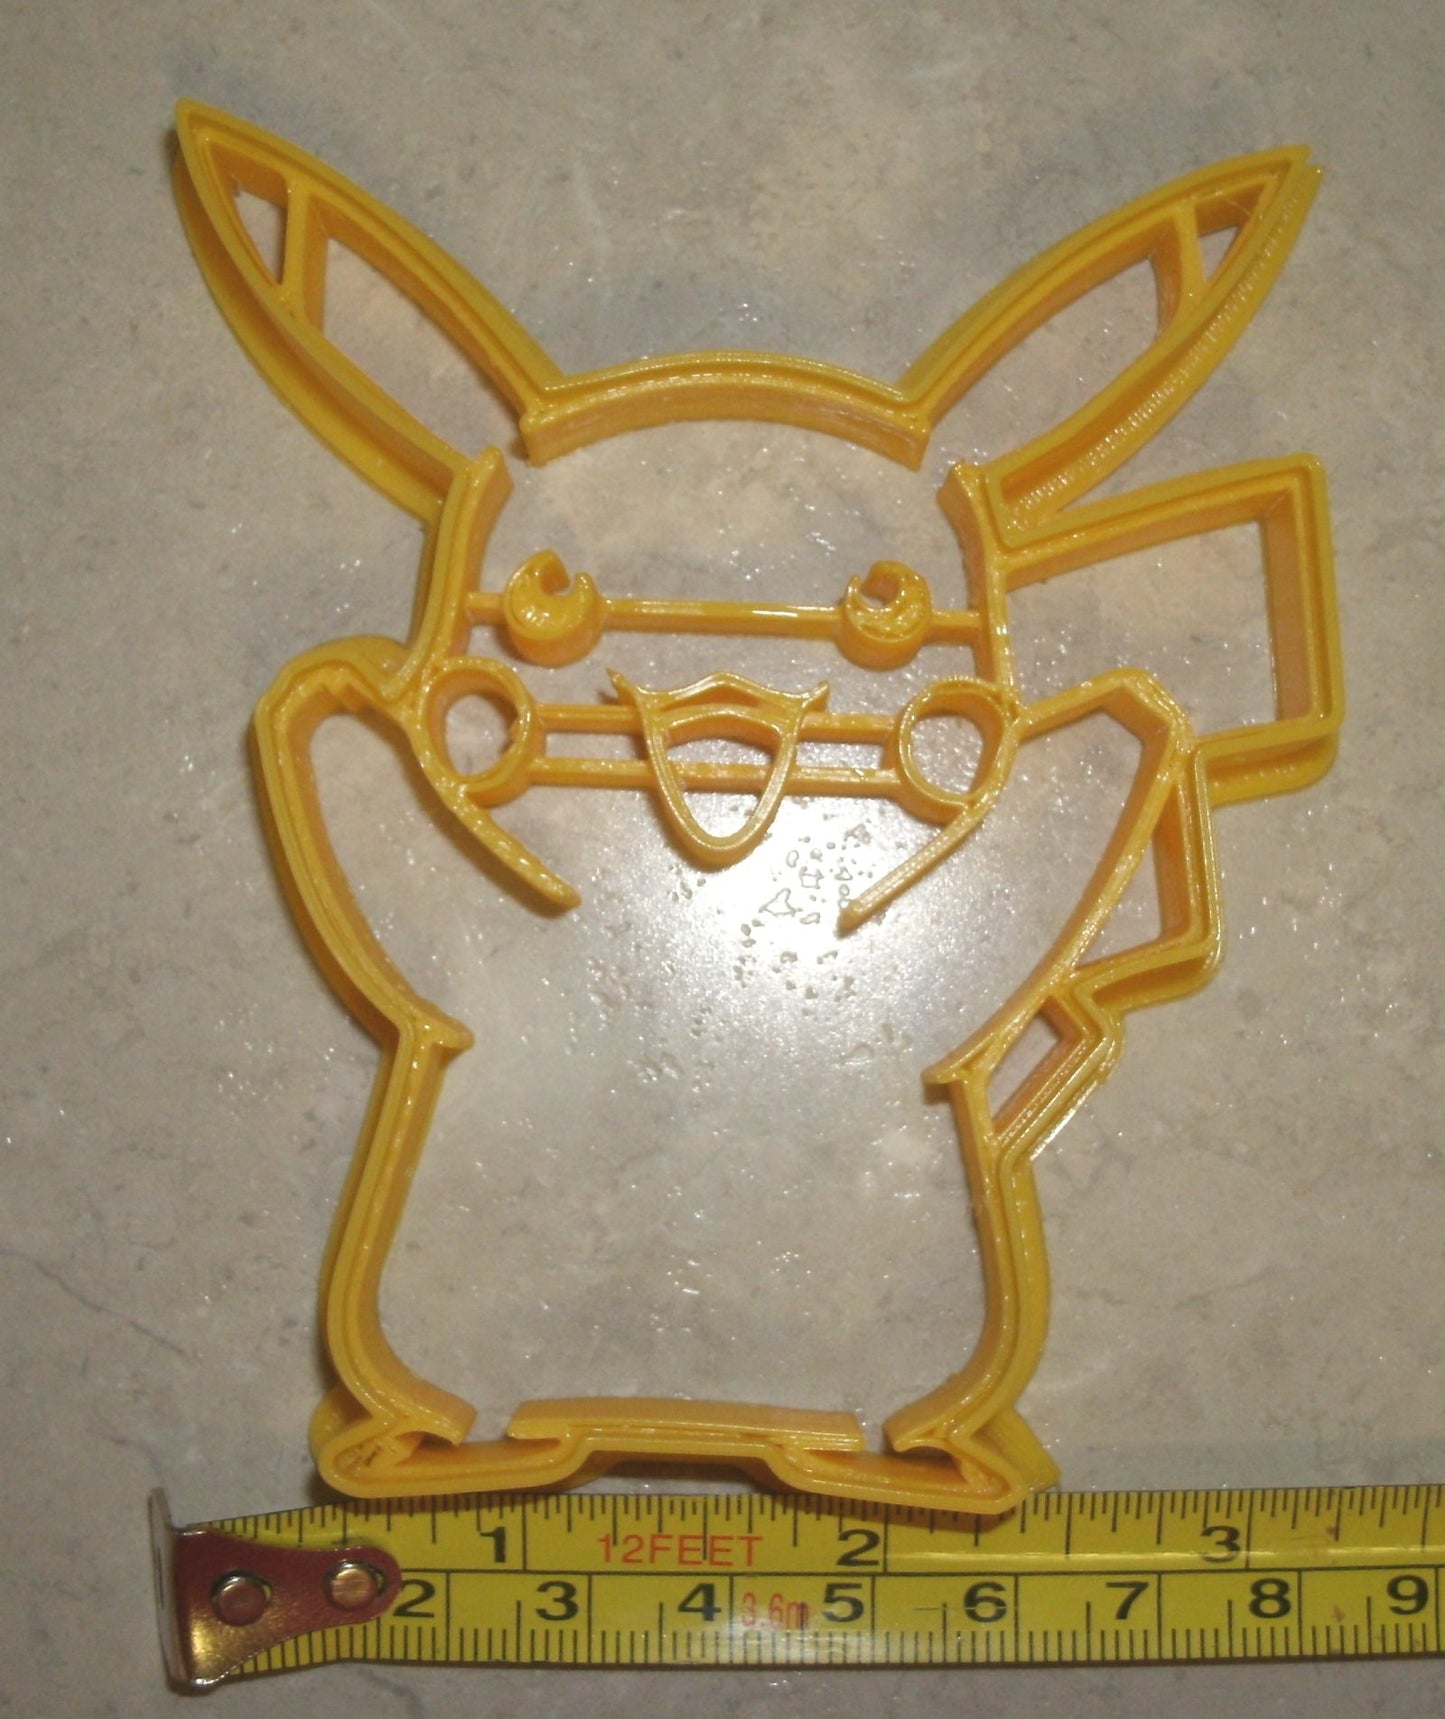 Pikachu Pokemon Go Anime Video Game Character Cookie Cutter Made in USA PR460